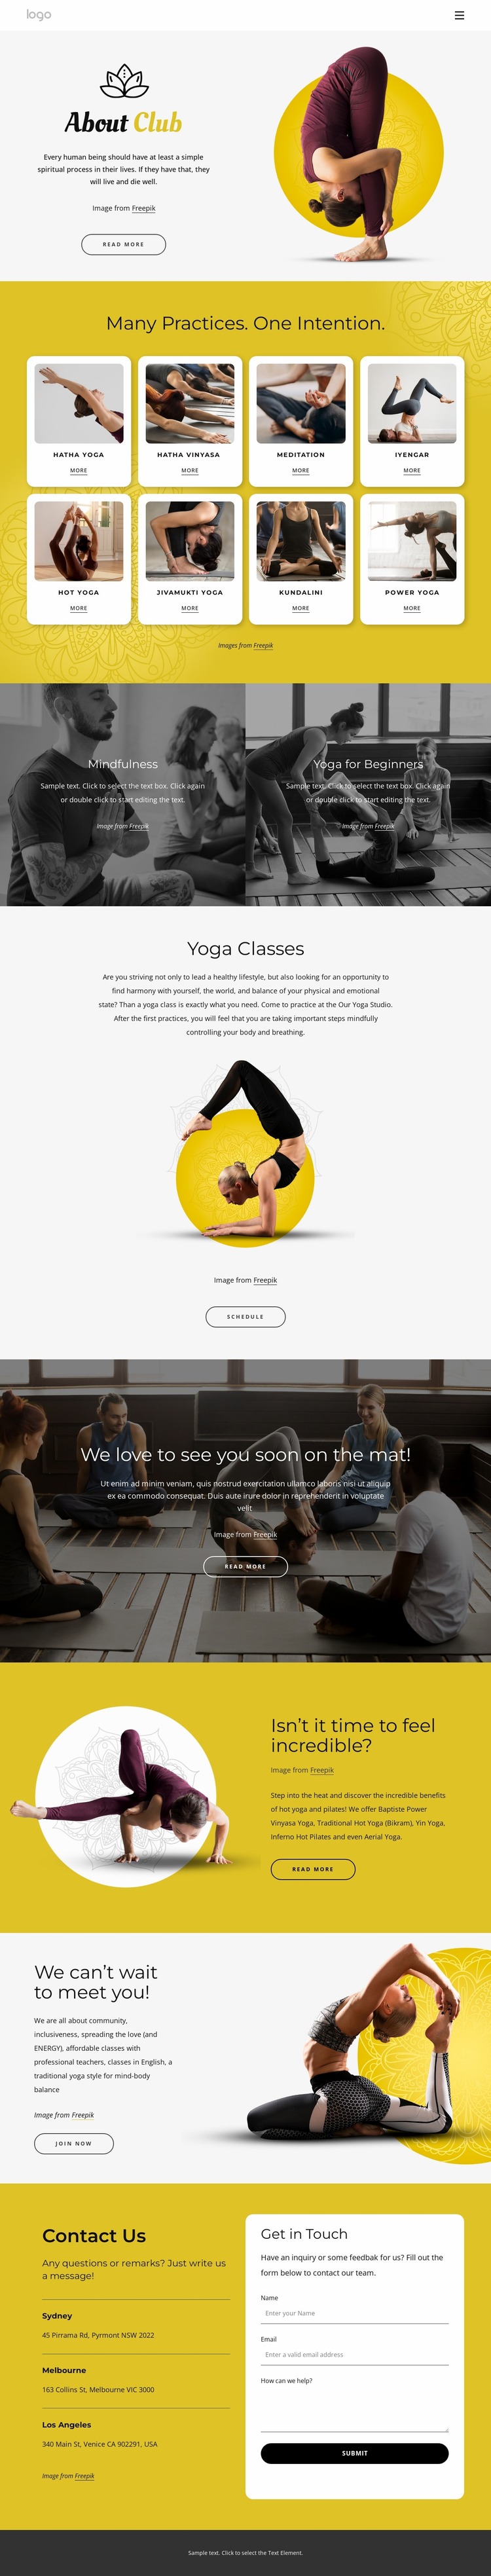 Physical, ethical and spiritual practice Website Mockup